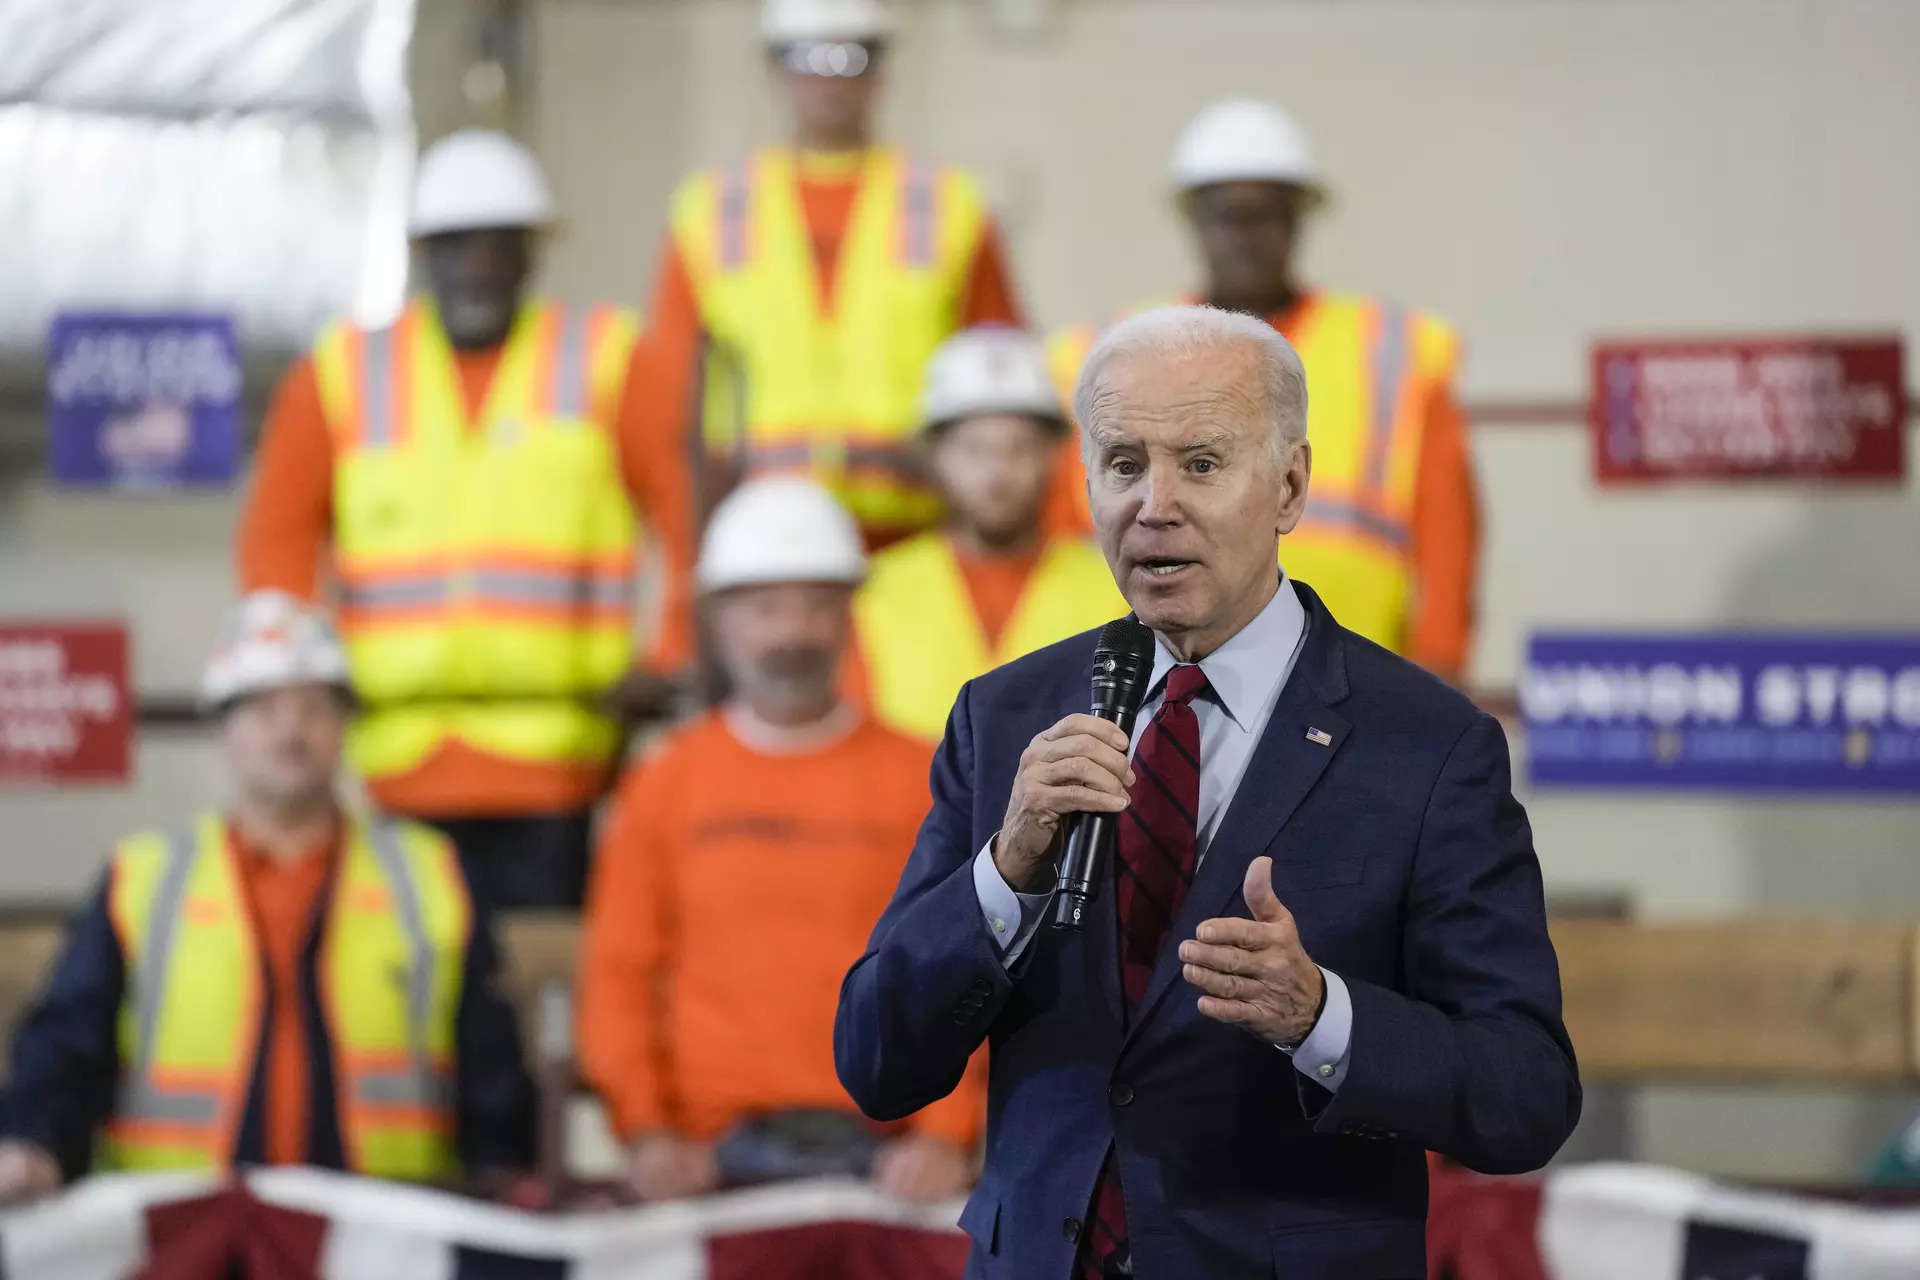 As employers face labor shortages, Biden administration rolls out playbook for training workers